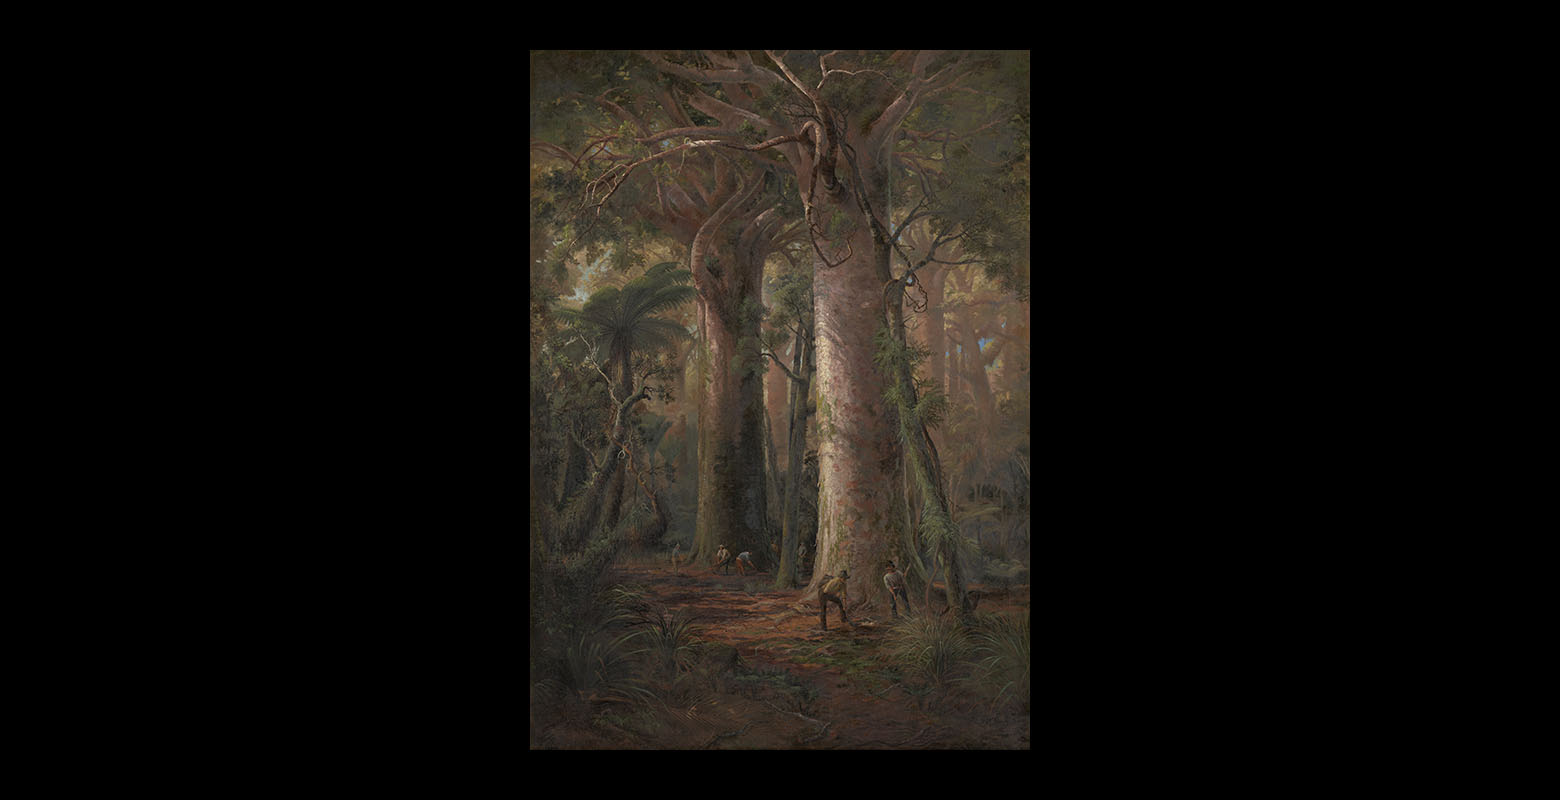 View of dense forest. Huge kauri trees dominate the scene, and dwarf the men scattered throughout the scene